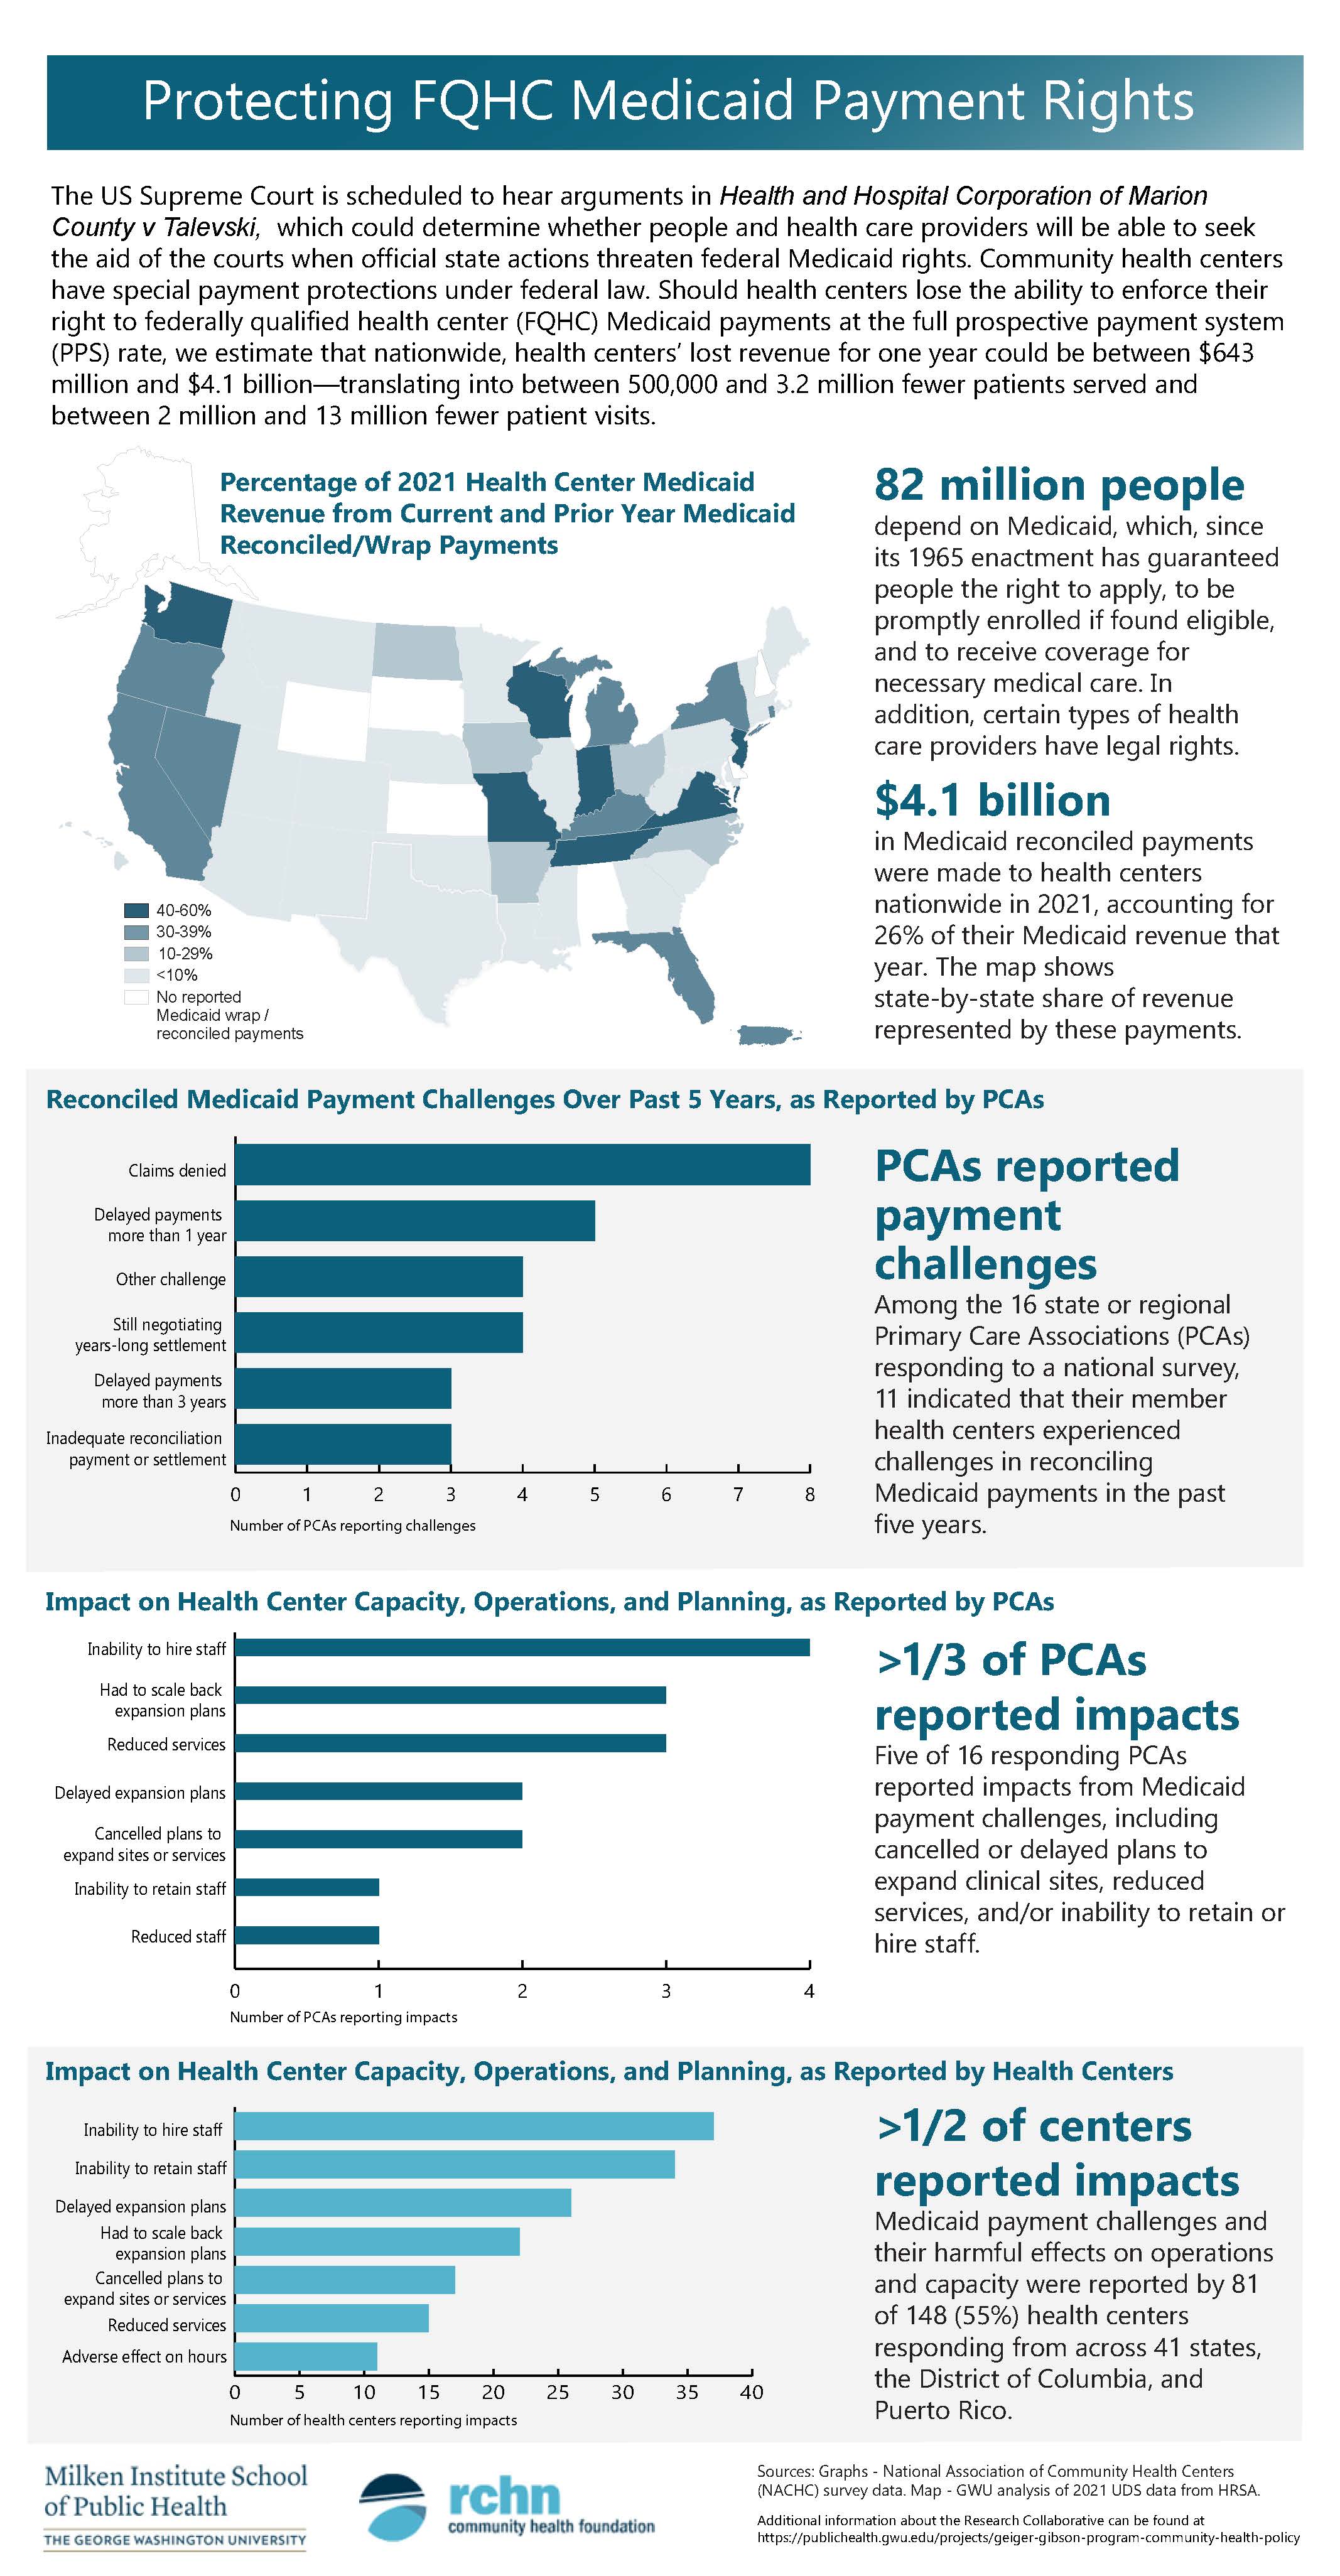 Protecting FQHC Medicaid Payment Rights: Illustrating the challenges and impact faced by PCAs and health centers across the country. More than half of the PCAs and Health centers surveyed reported impacts and challenges due to the difficulties in reconciling Medicaid payments in the past 5 years.